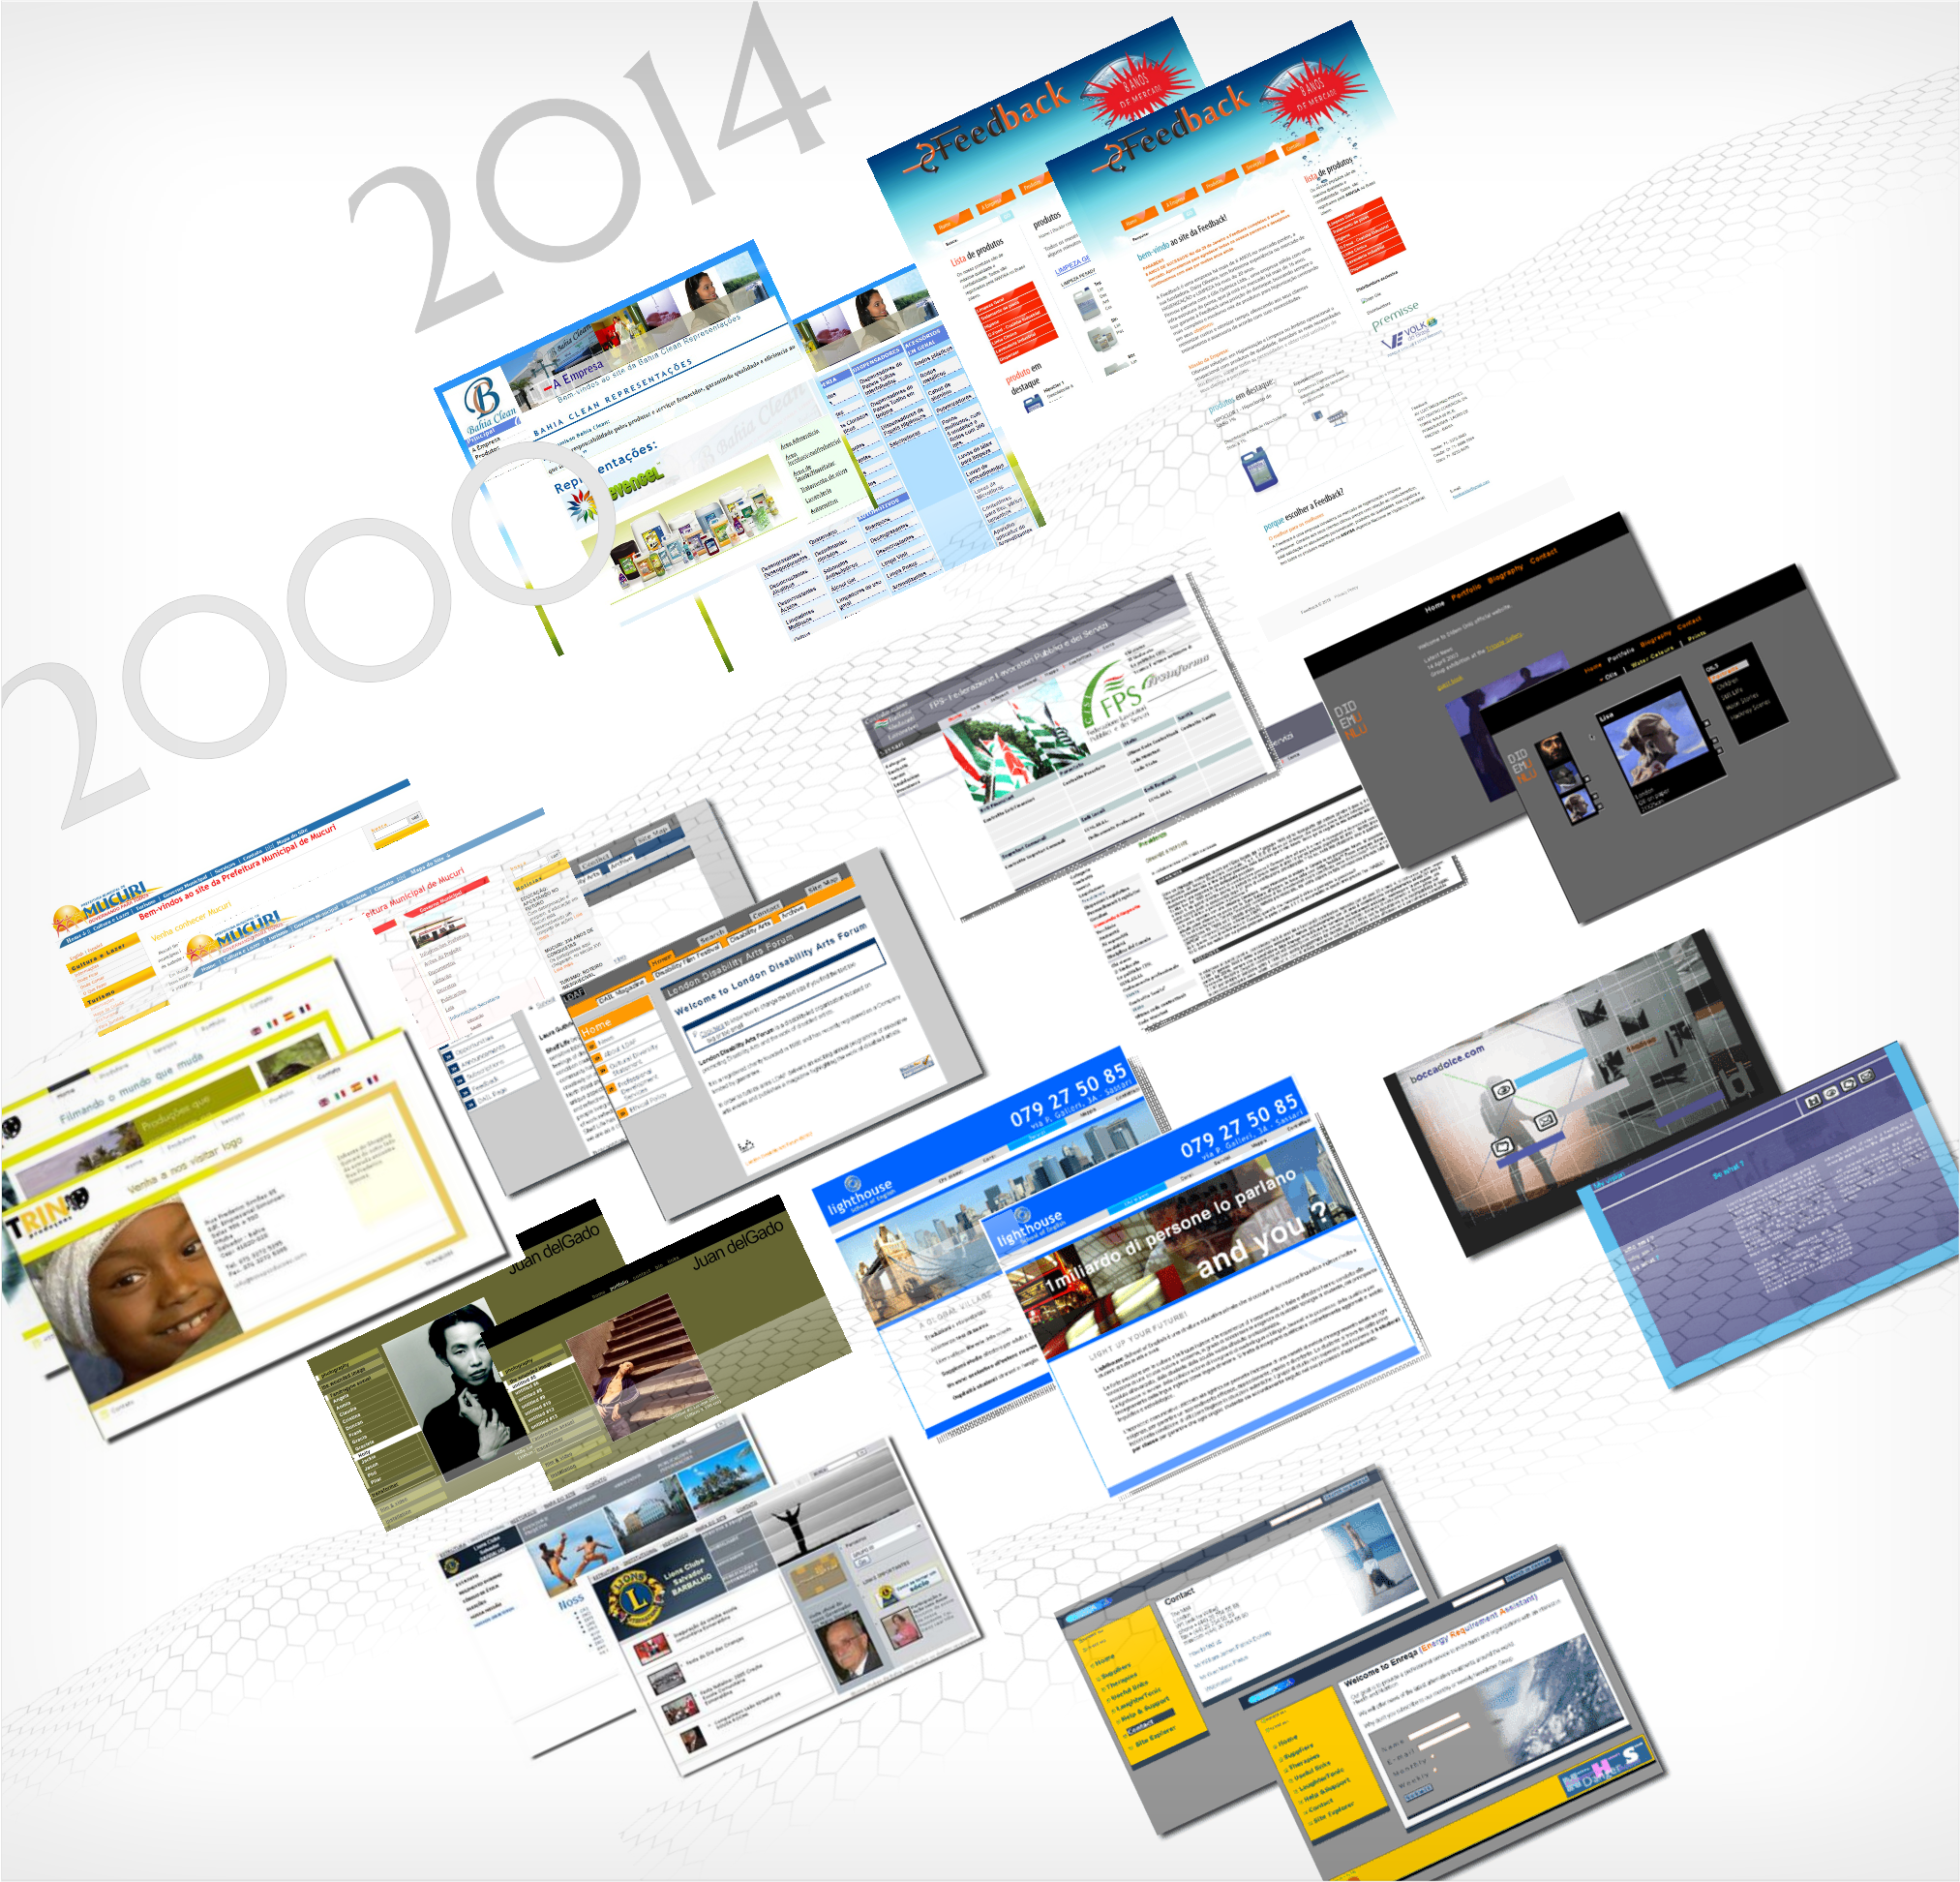 an image showing many websites made by Gian Mario Pintus